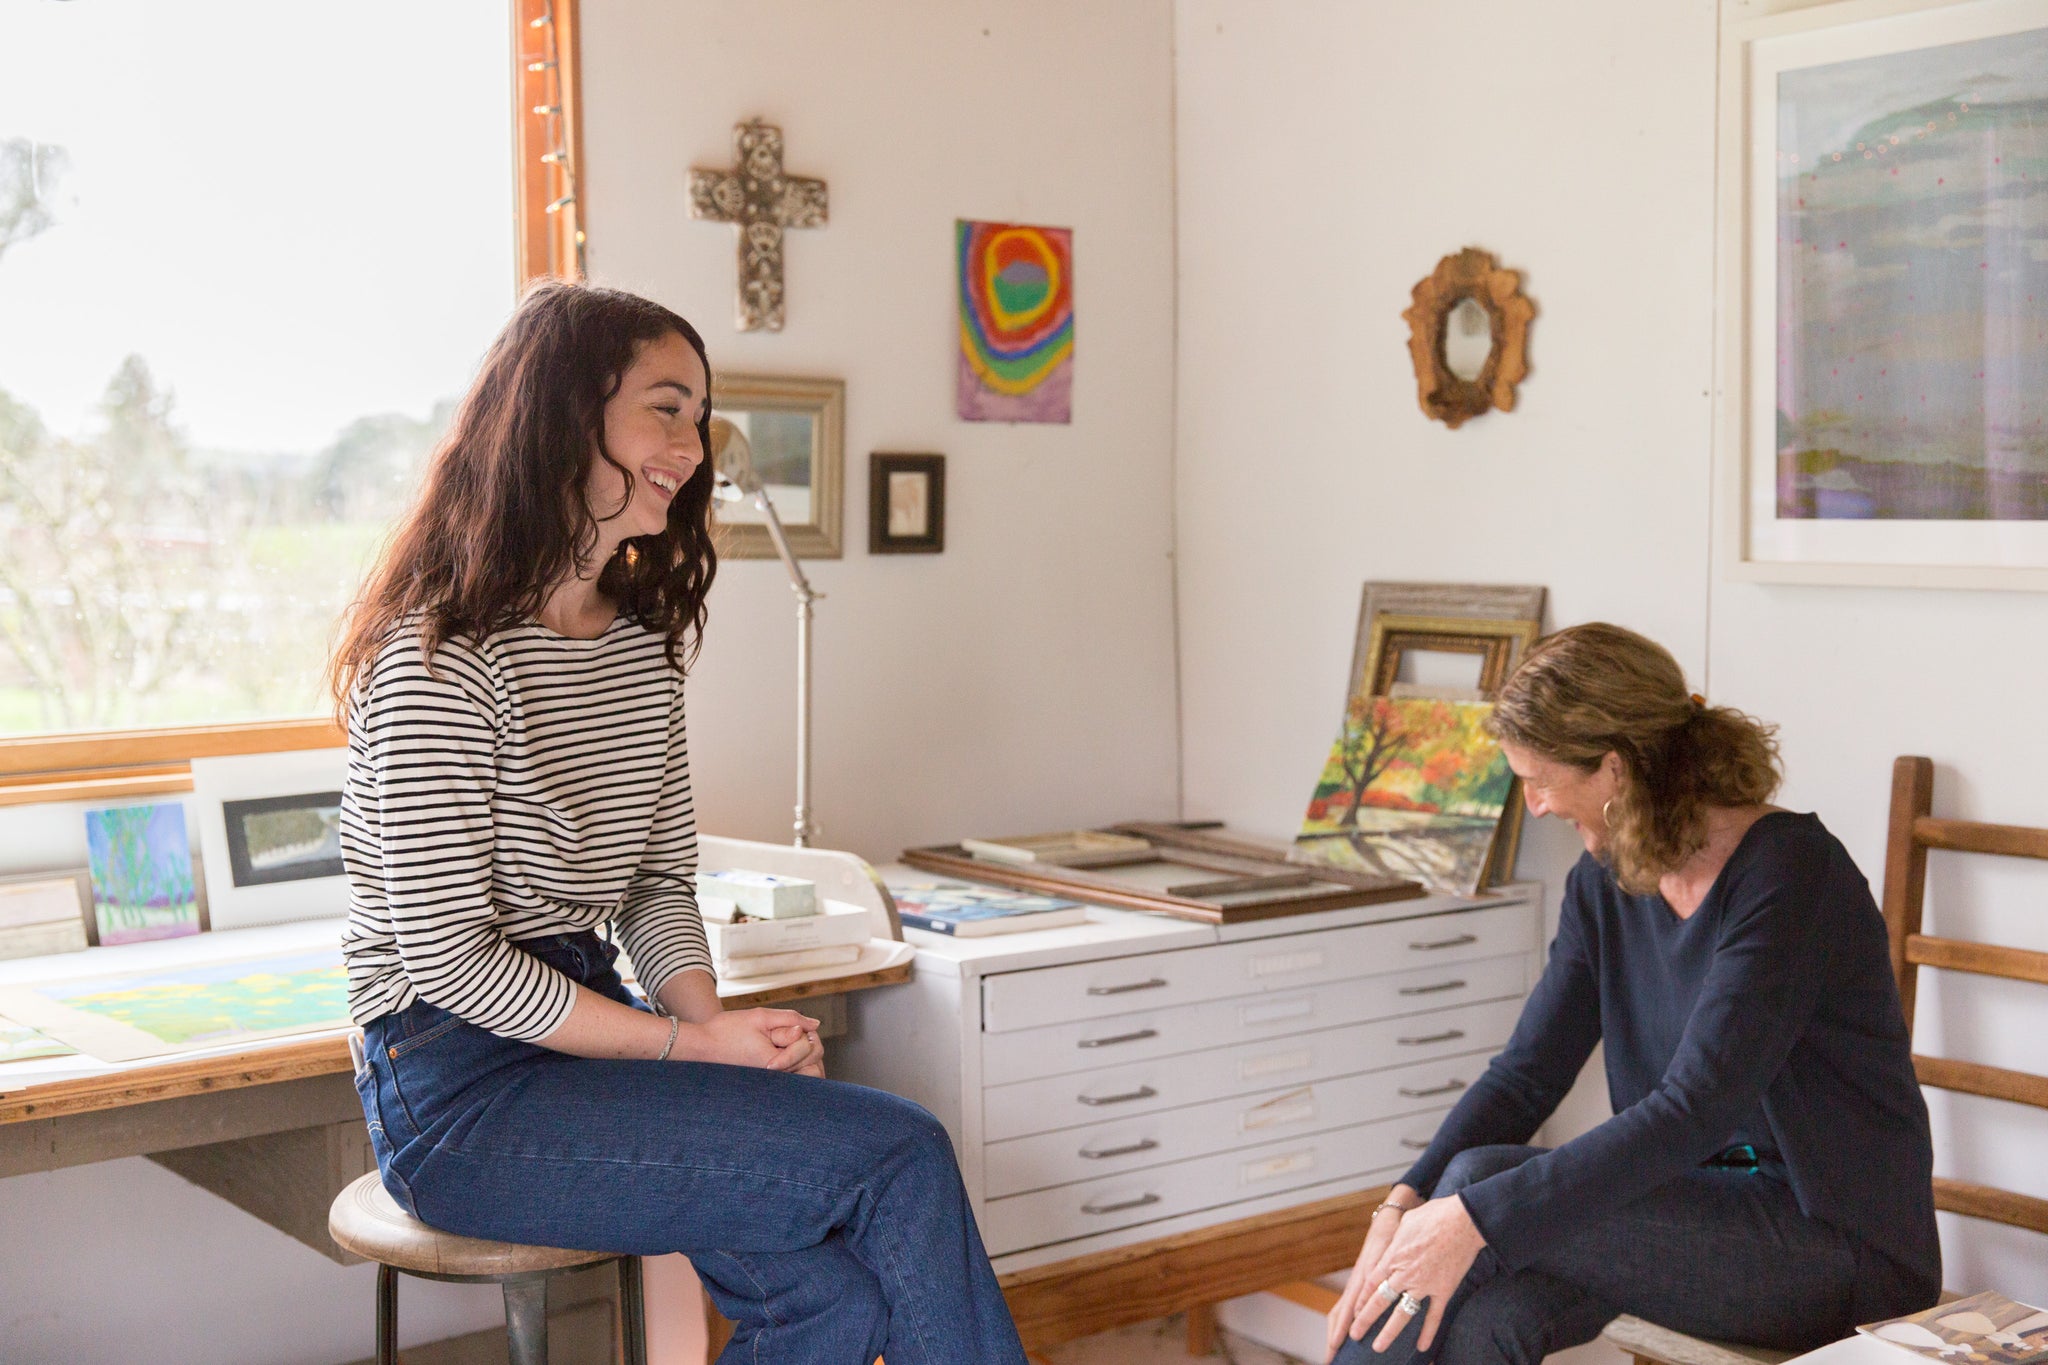 artist, Kate Blakeslee, and daughter, Cecilia Payne, in conversation